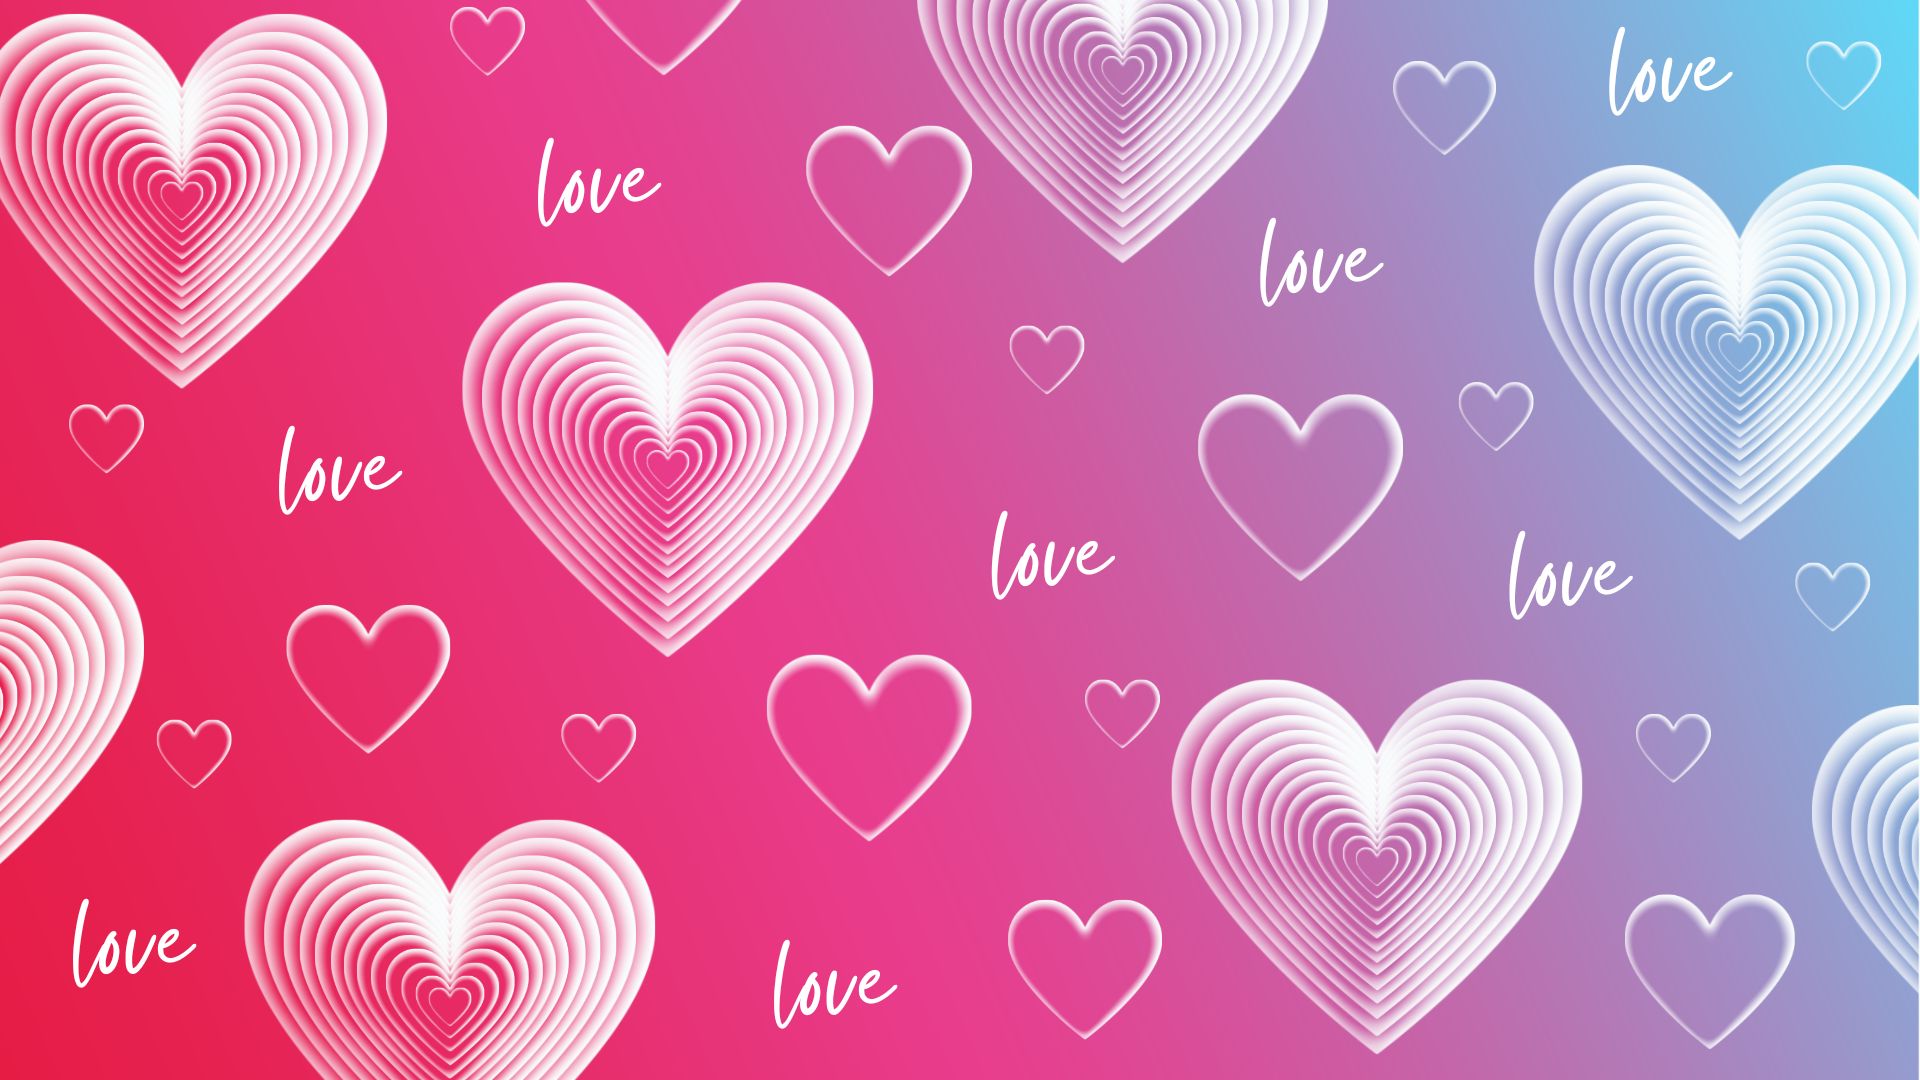 Love Hearts Background Images (3)